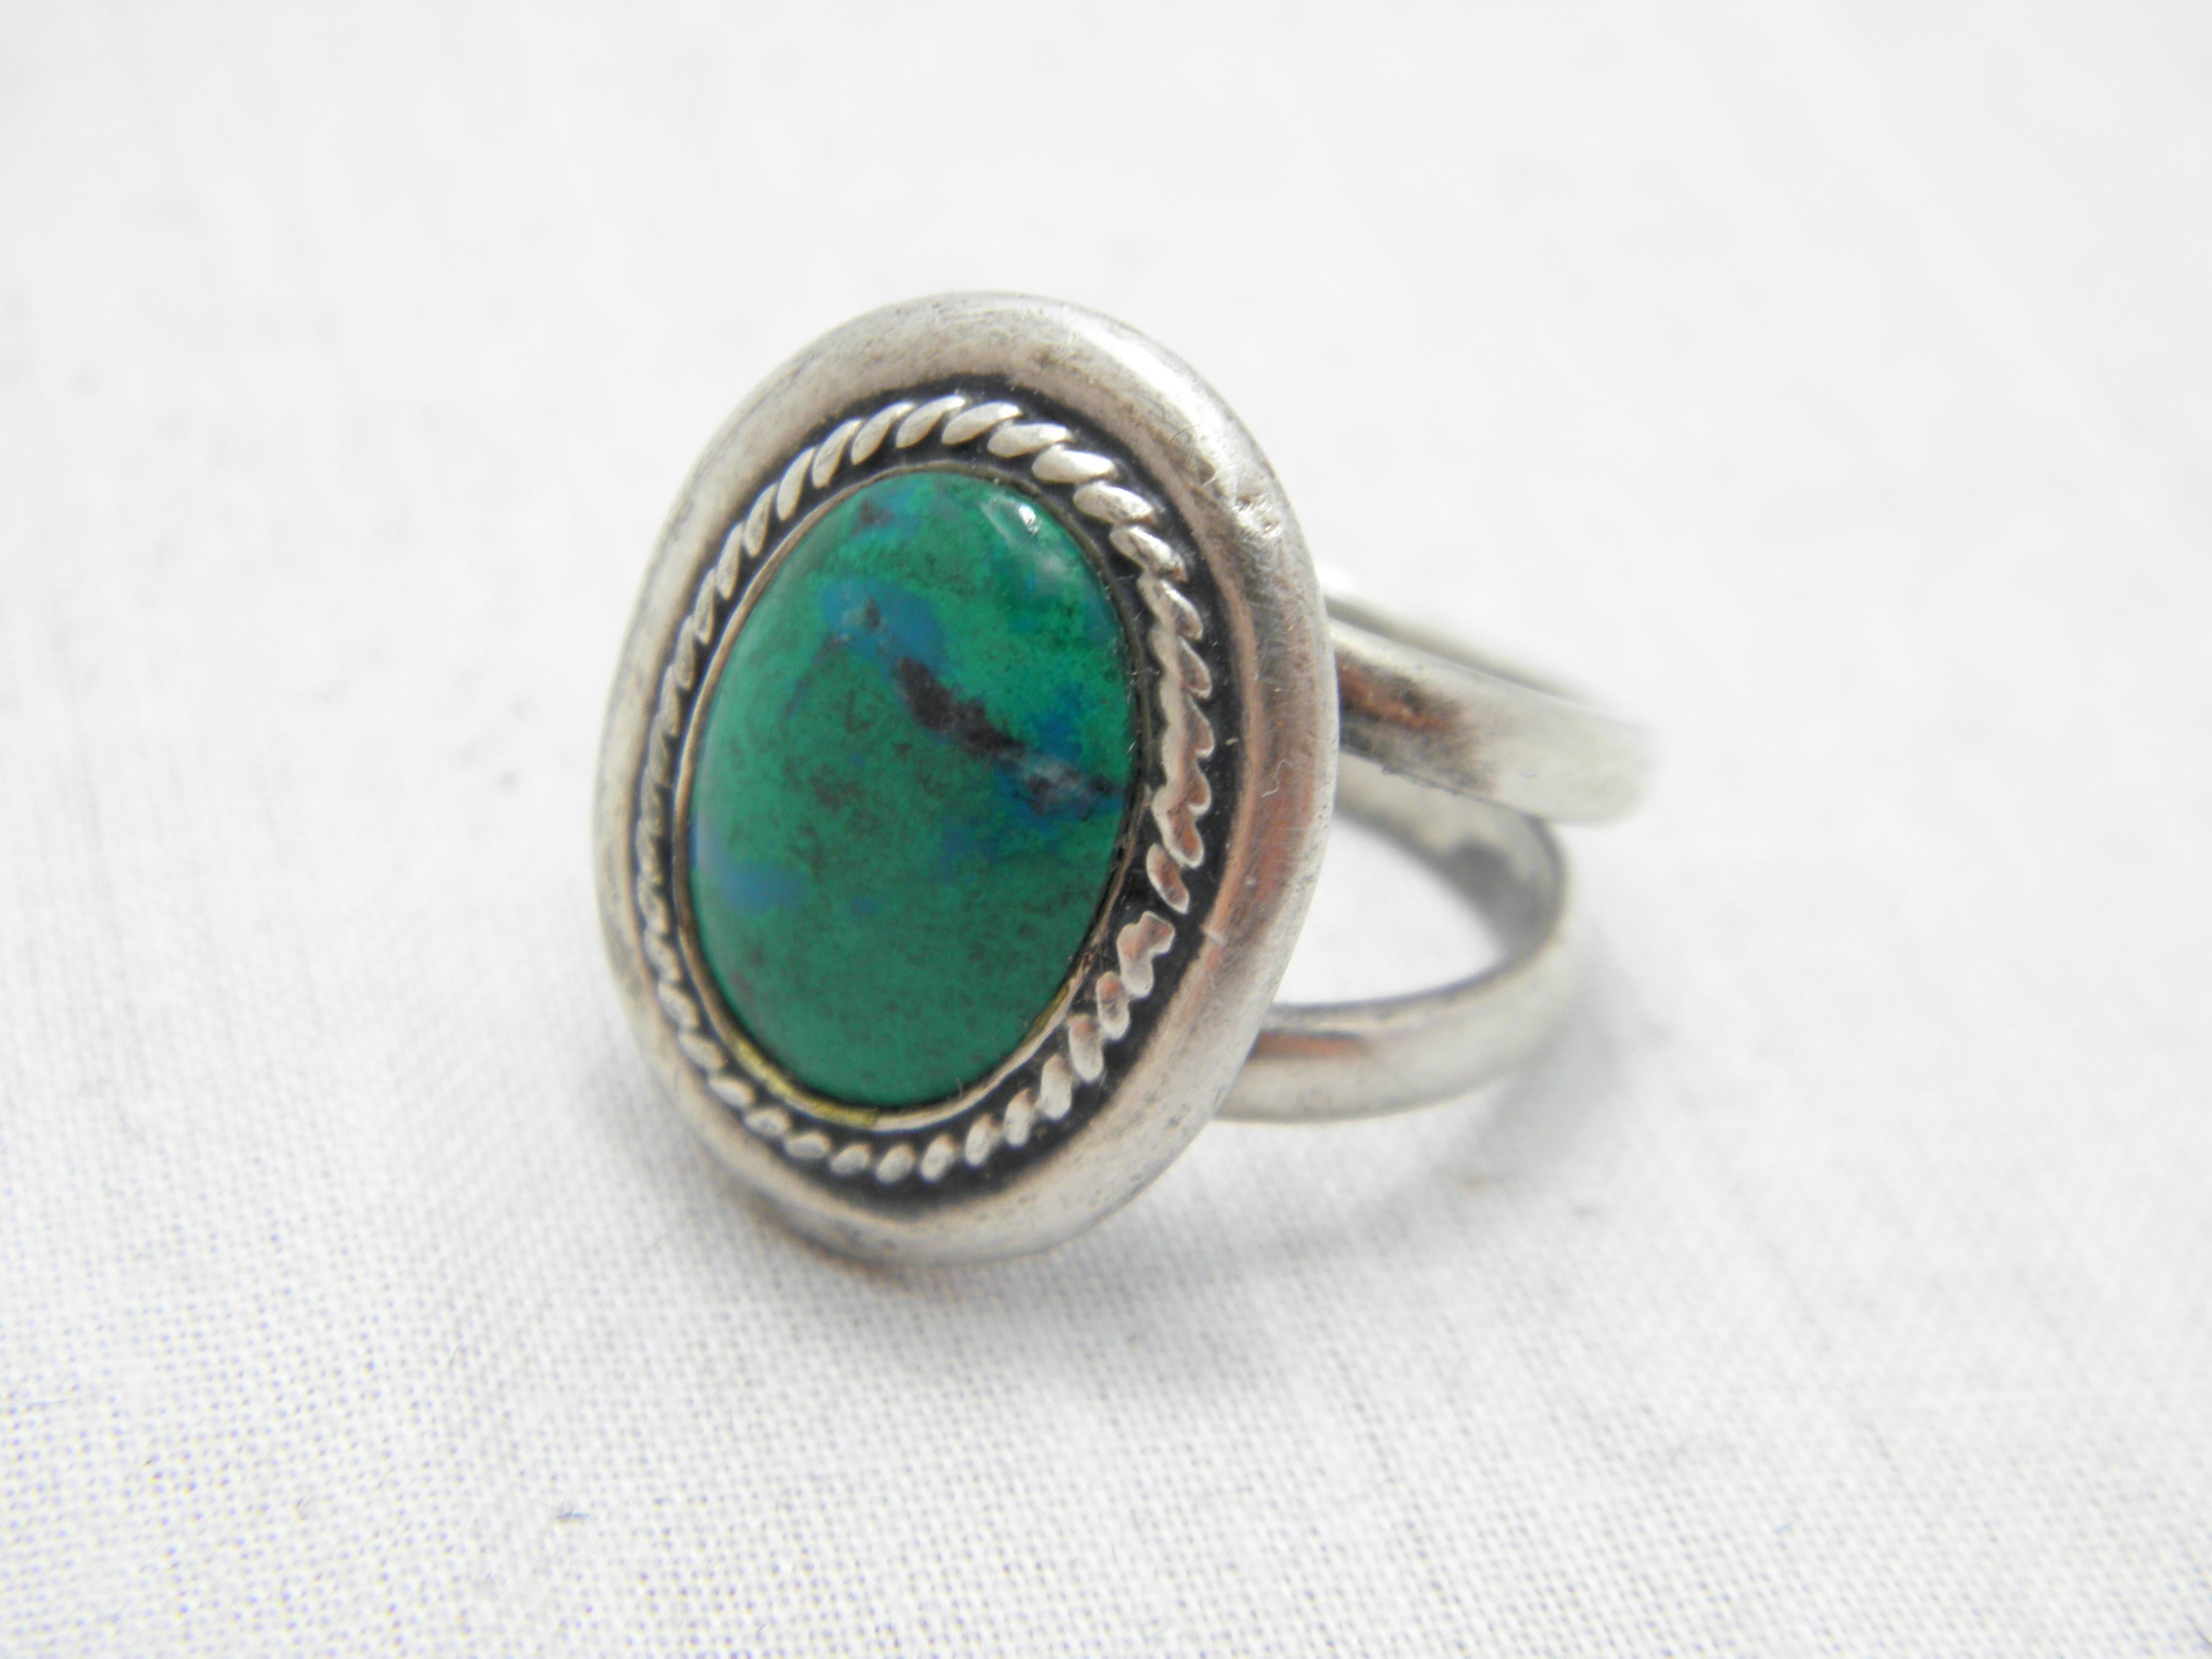 If you have landed on this page then you have an eye for beauty.

On offer is this gorgeous
ANTIQUE BRITANNIA SILVER TURQUOISE SIGNET / STATEMENT RING

Crafted from solid Britannia Silver (950/000)
and fully assay marked, though Hallmark exempt and